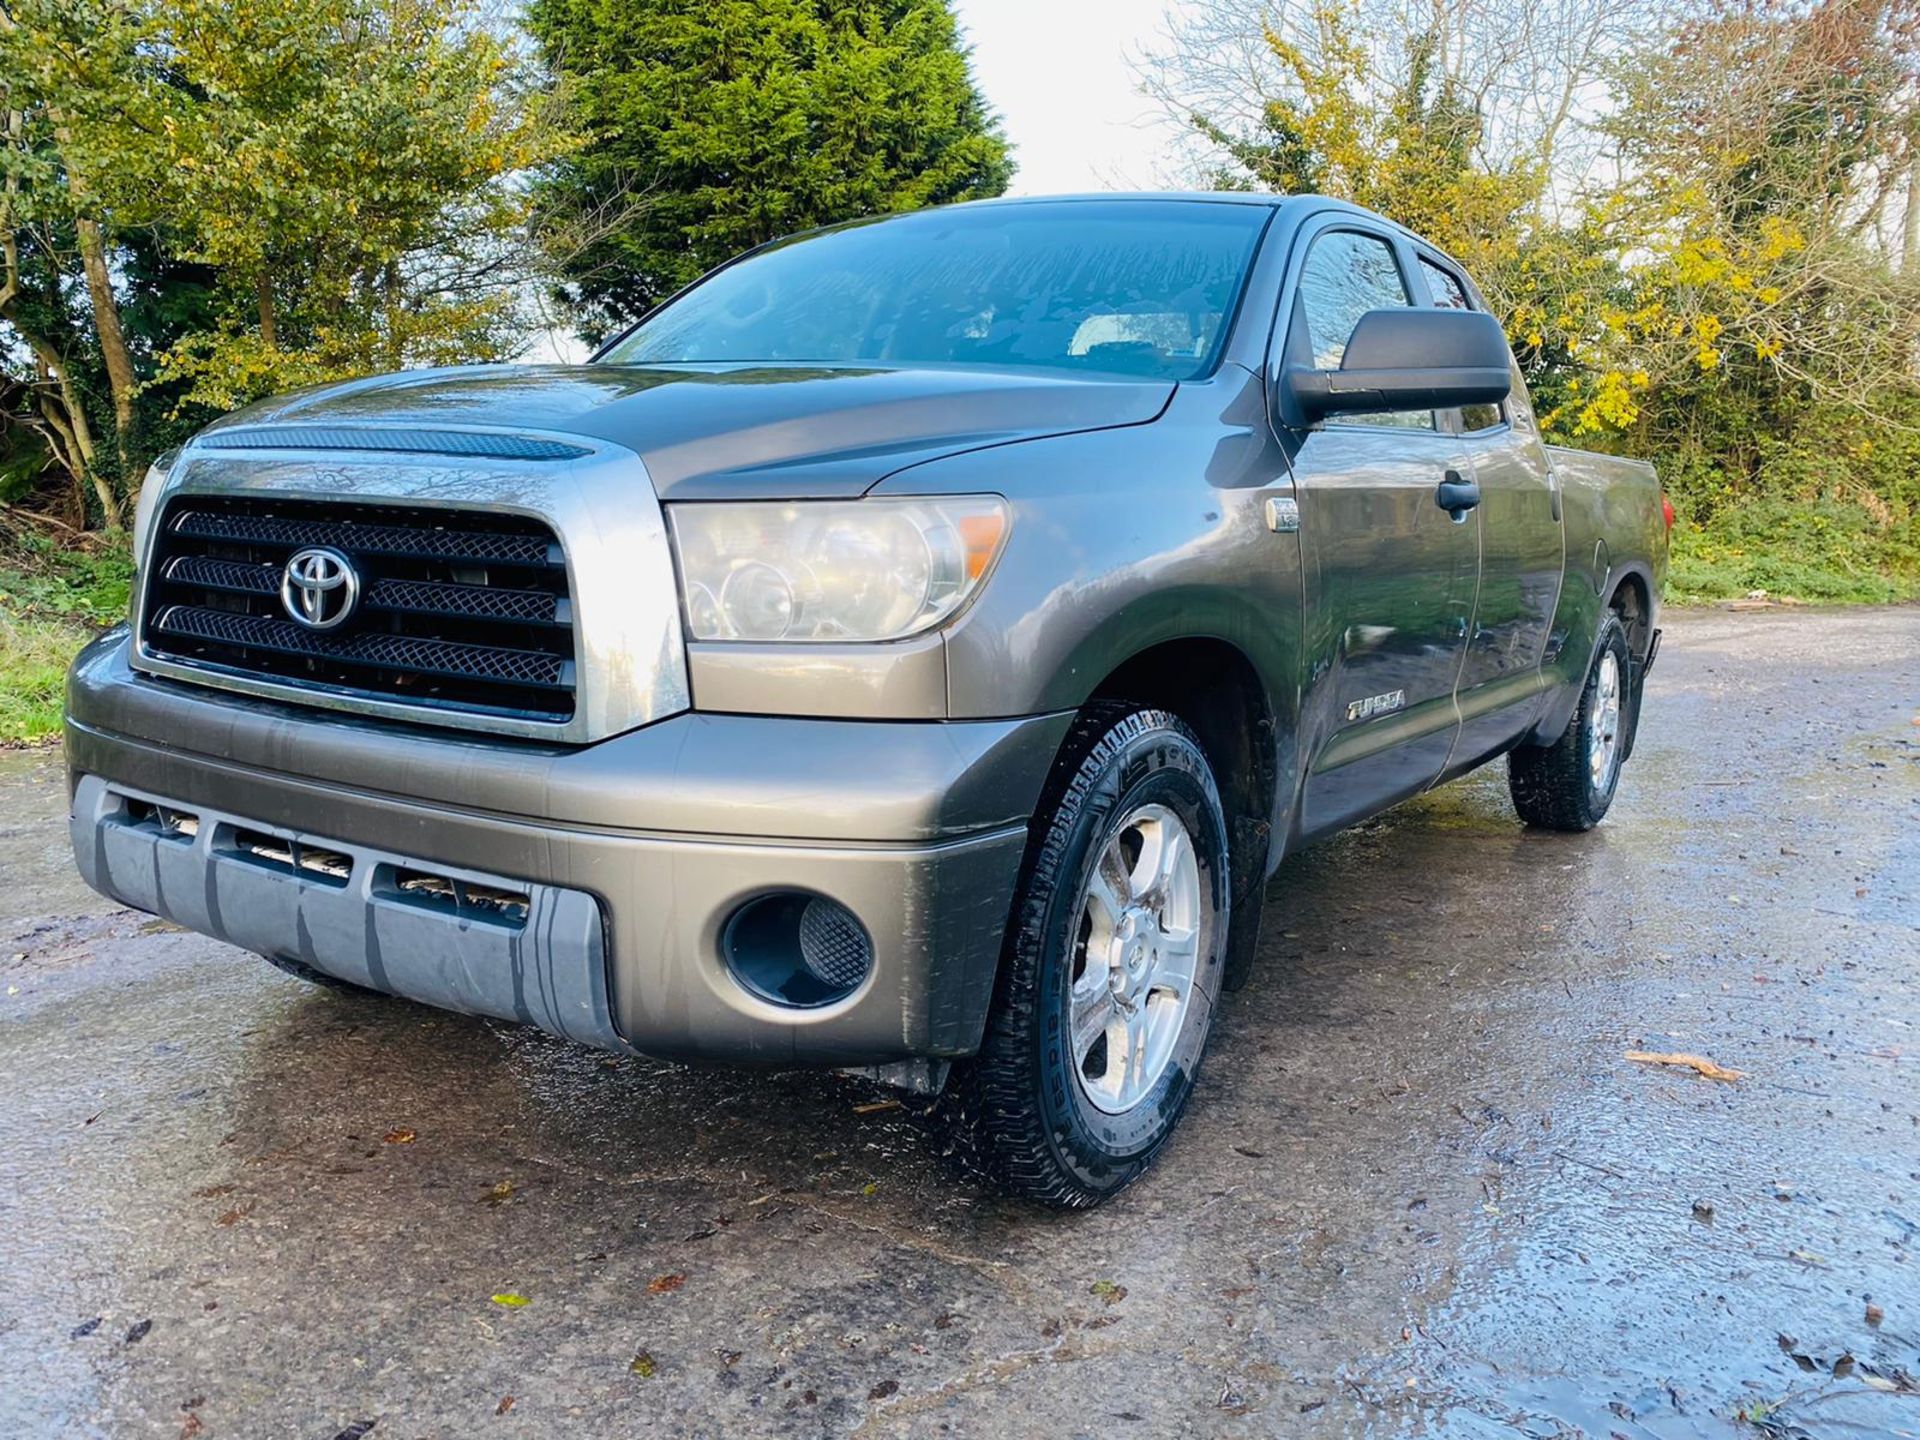 (Reserve Met)TOYOTA TUNDRA 4.7L V8 SR5 DOUBLE-CAB - 2008 YEAR - AIR CON - FRESH IMPORT - - Image 11 of 37